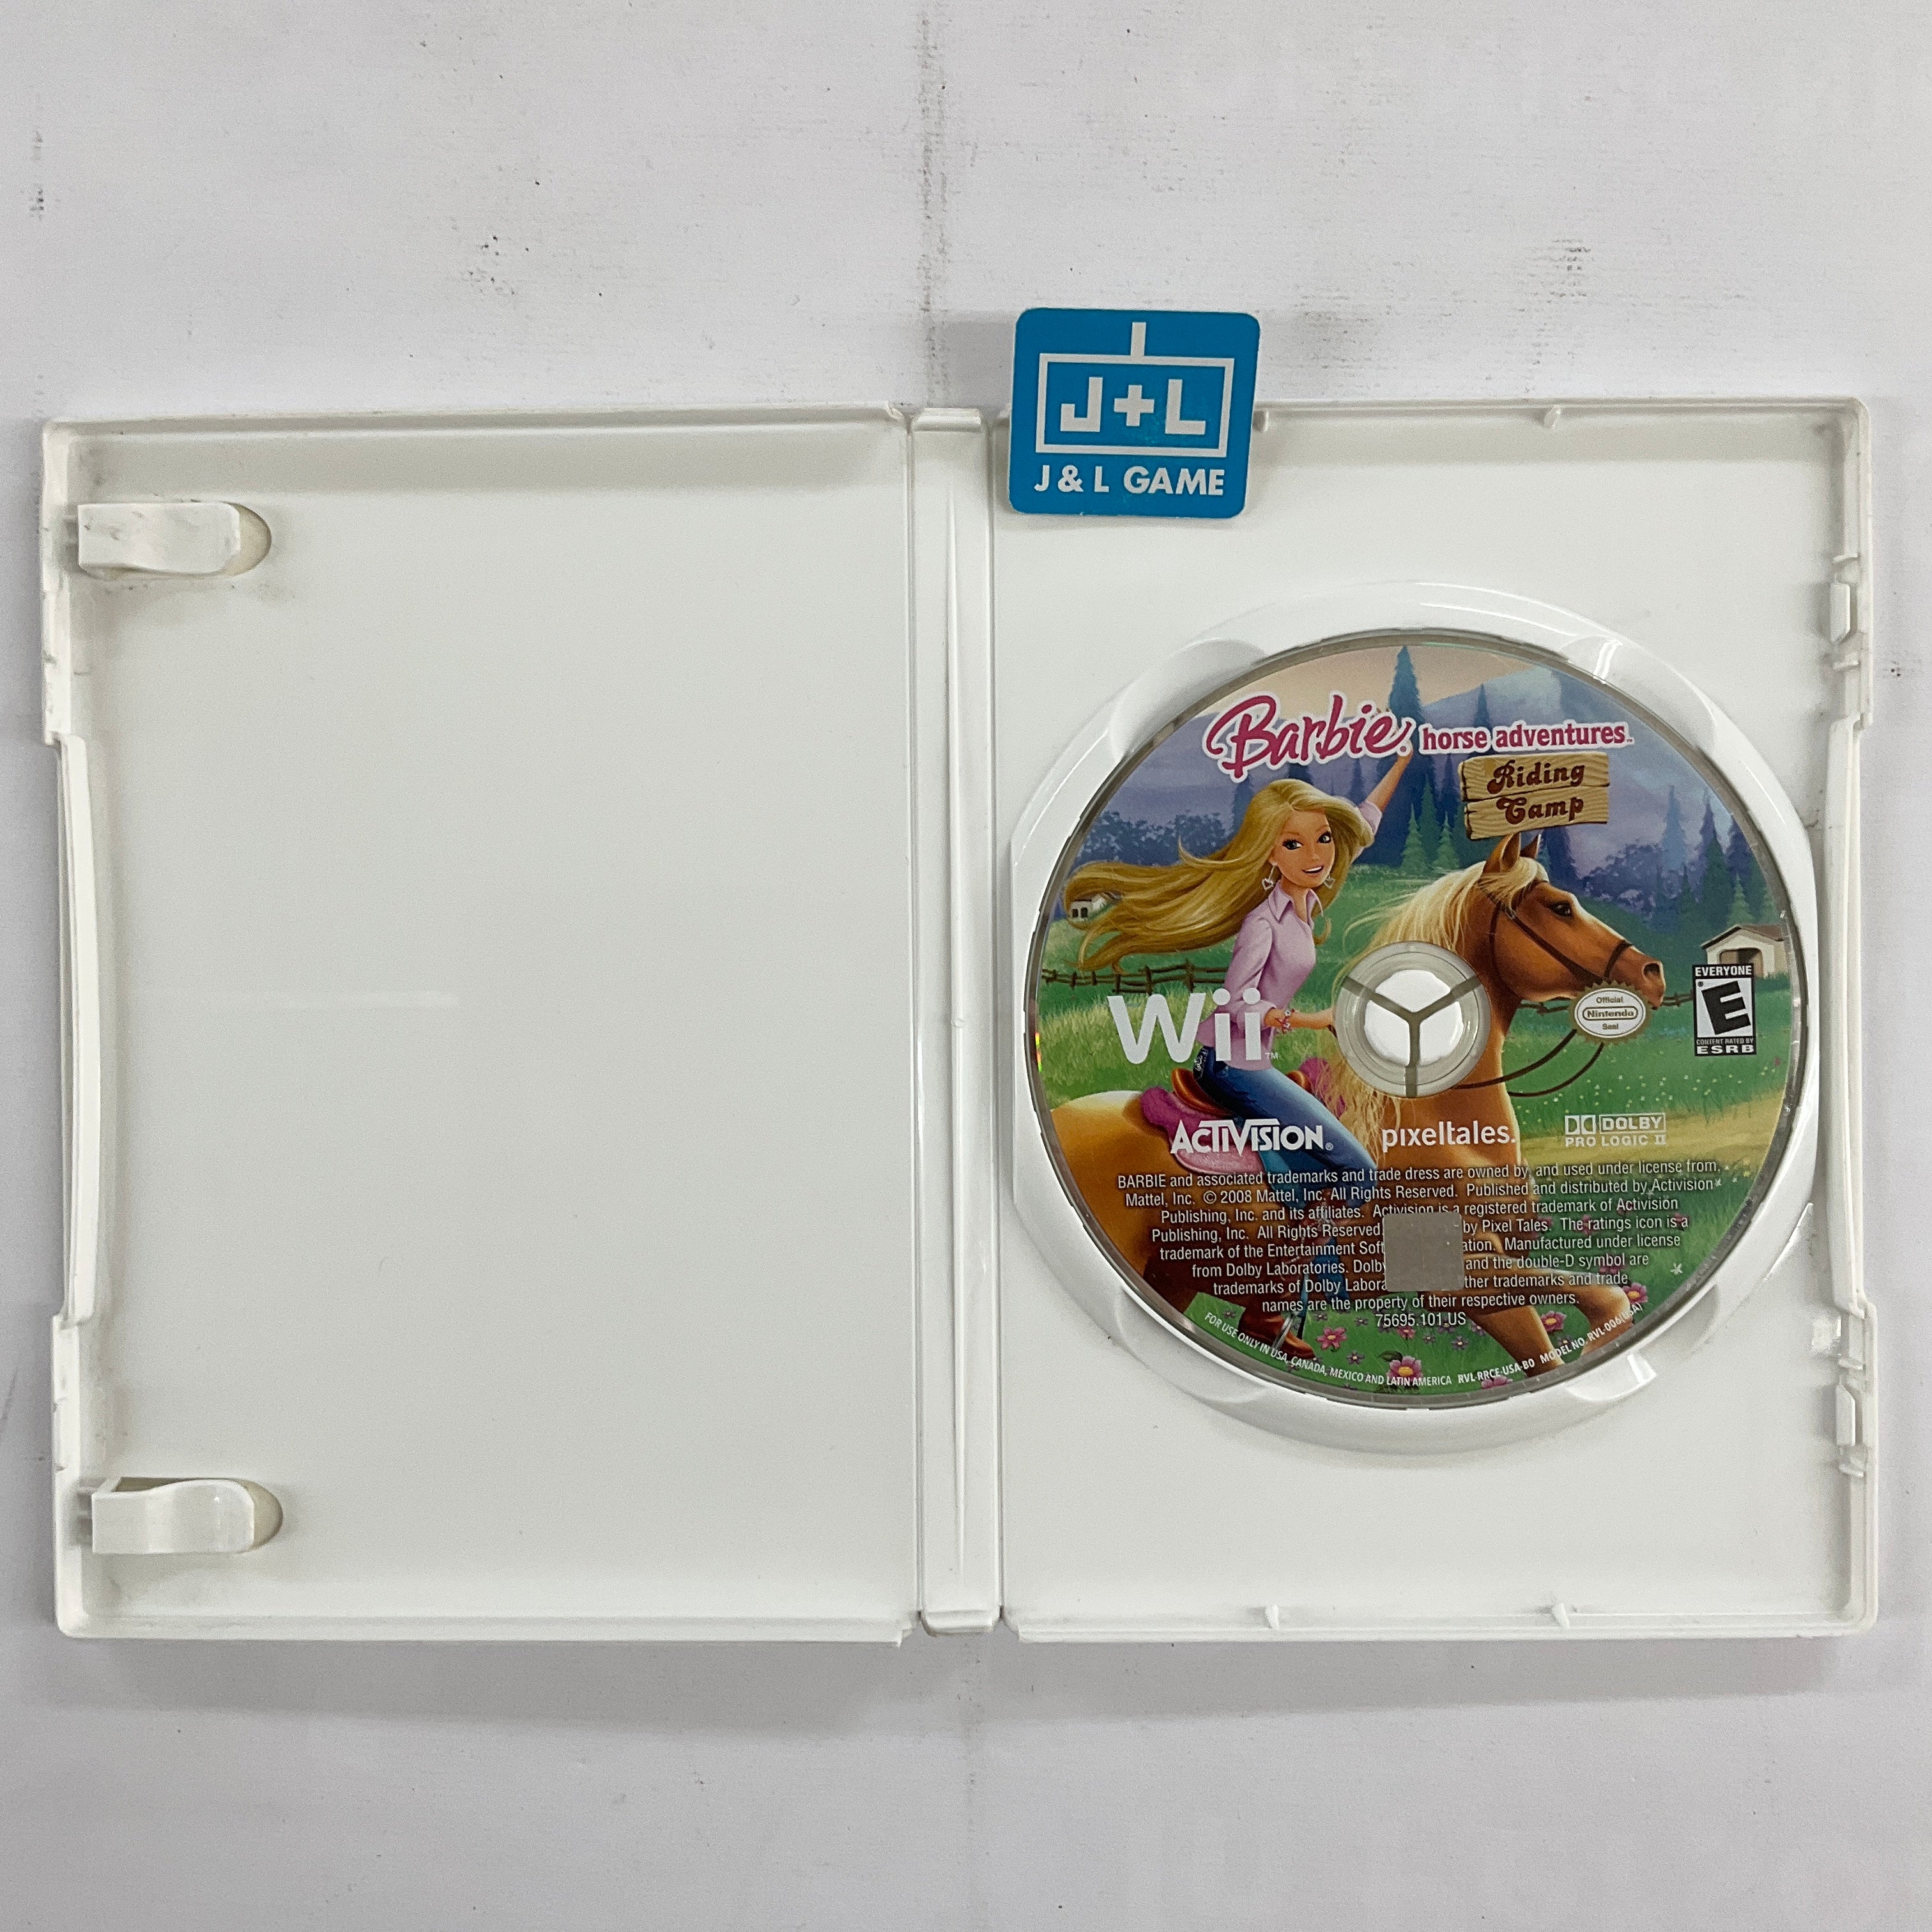 Barbie Horse Adventures: Riding Camp - Nintendo Wii [Pre-Owned] Video Games Activision   